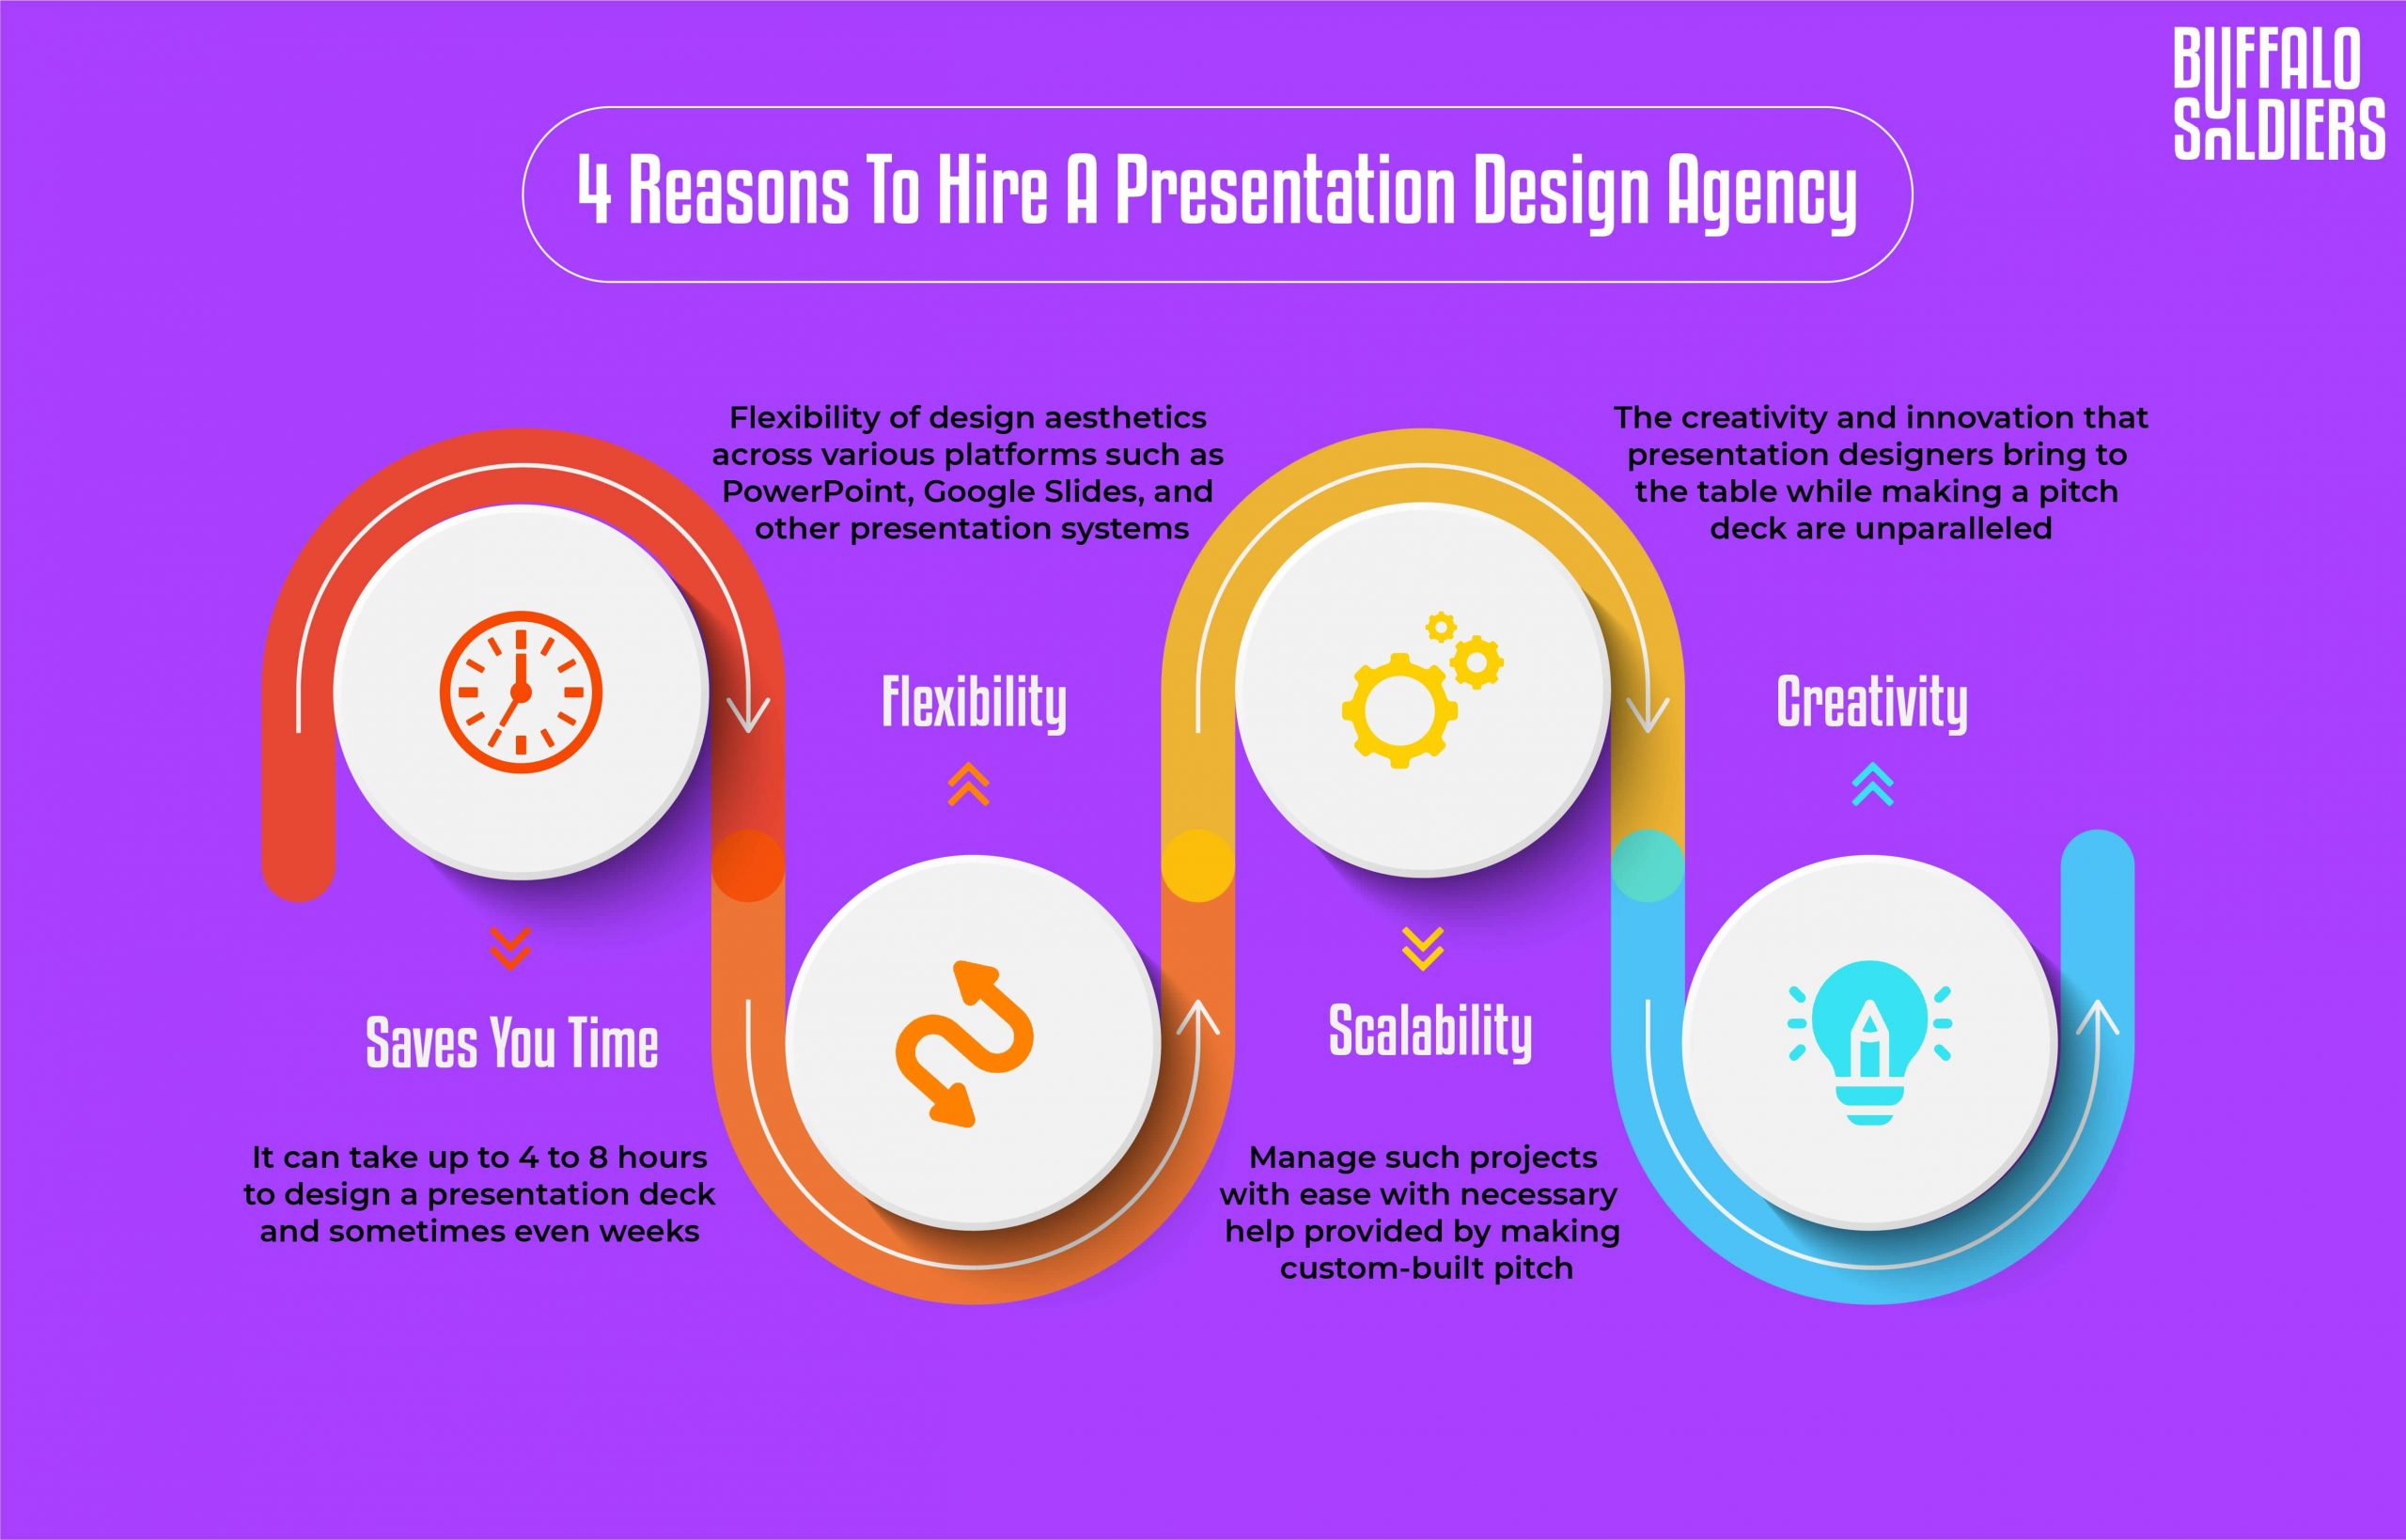 4 Reasons To Hire A Presentation Design Agency